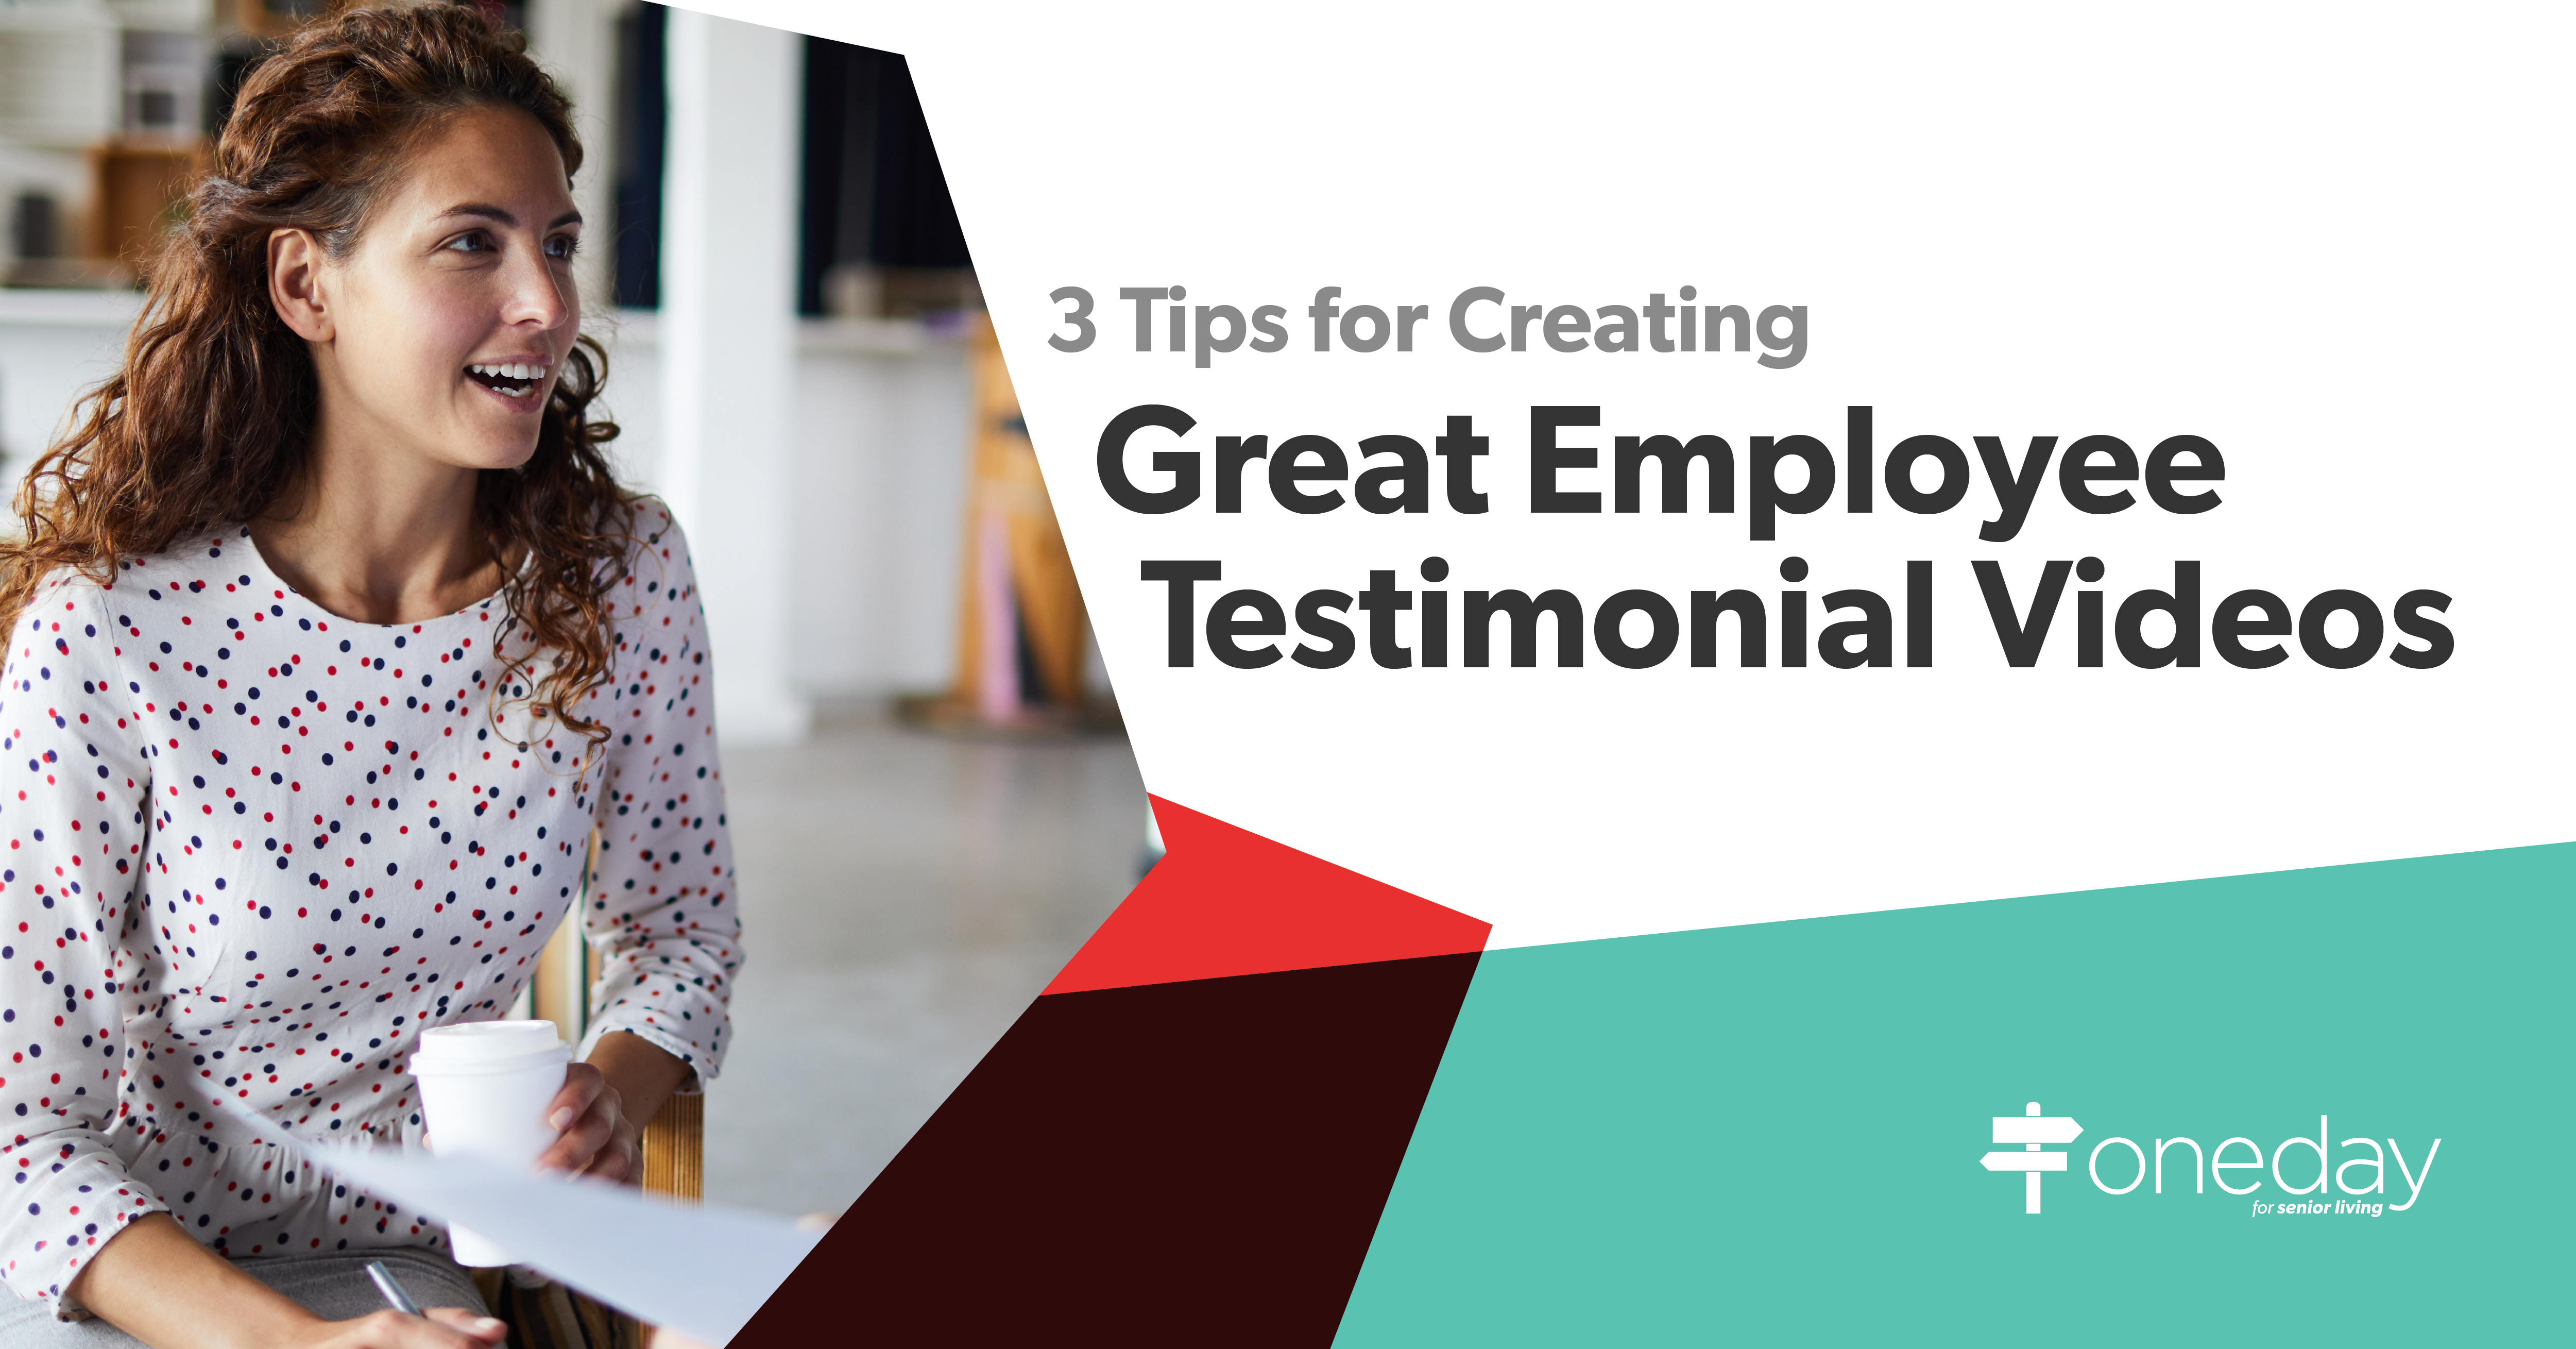 Three simple but powerful tips senior living communities can use to transform employee testimonial videos into a game changing advantage in recruiting.